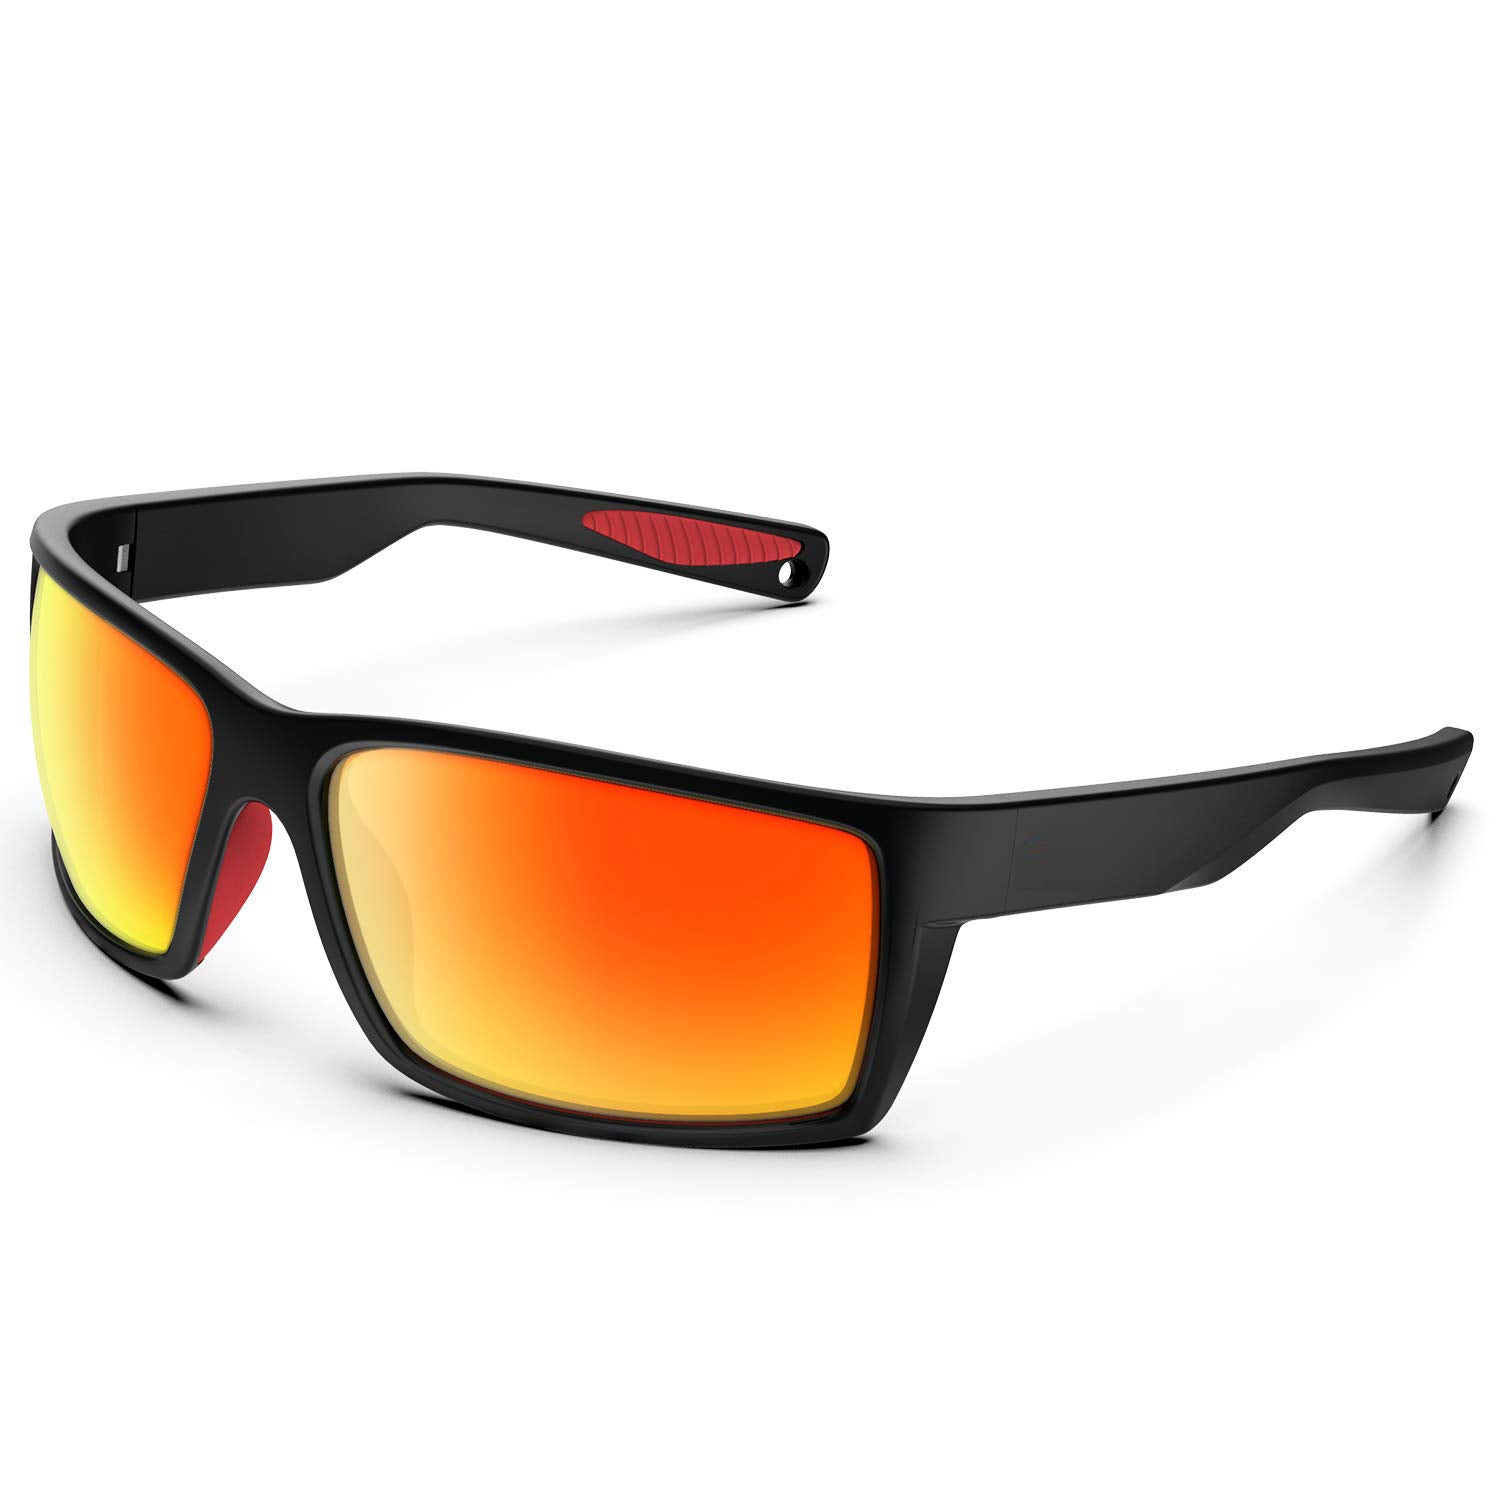 Konlley Polarized Fishing Sunglasses for Man and Women with